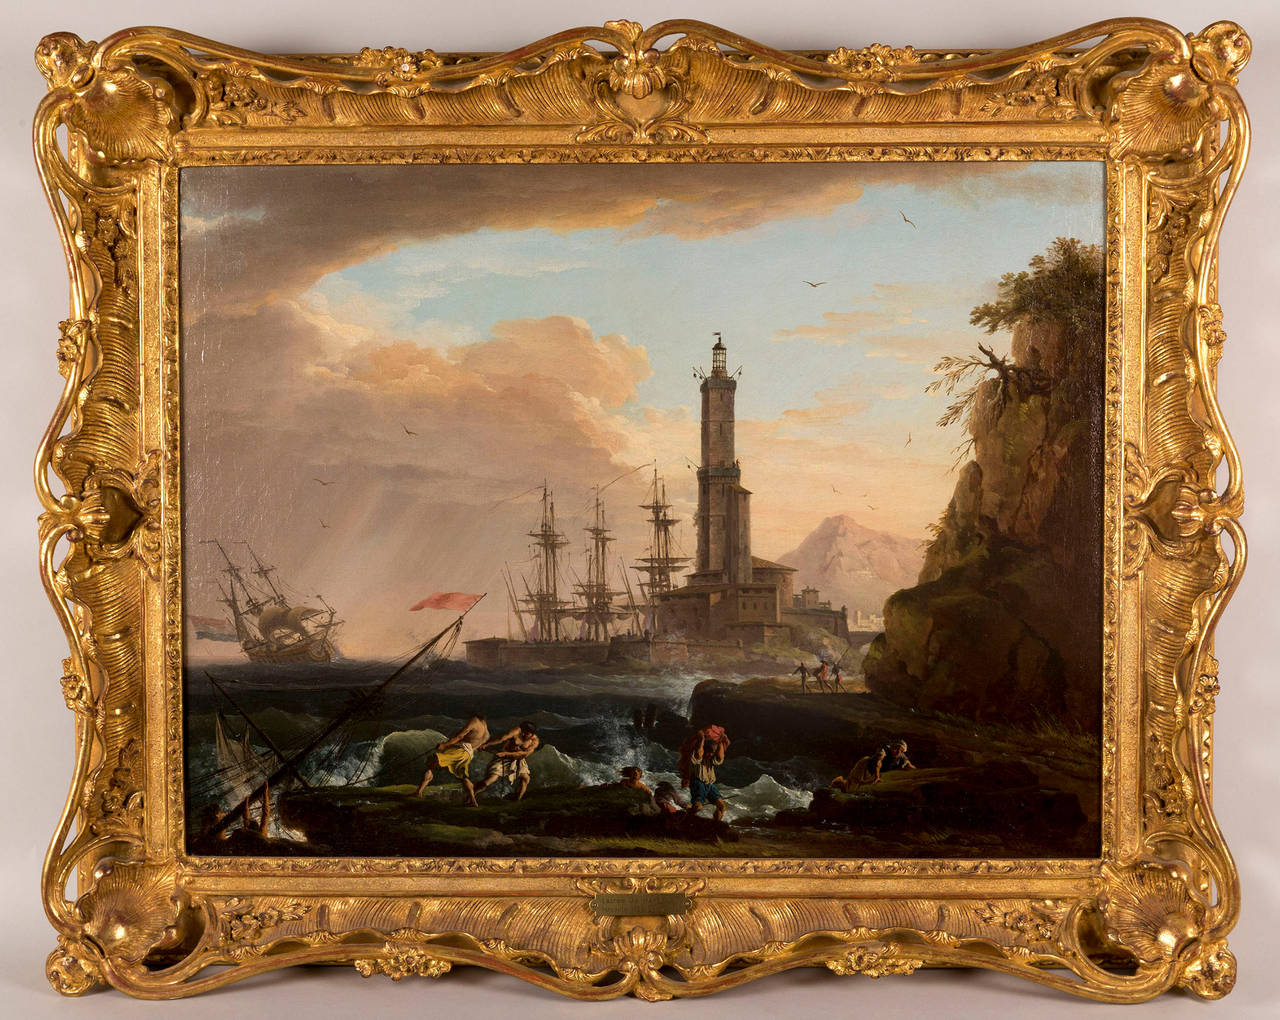 Marine, nightfall on a Mediterranean port by Charles Franc¸ois Lacroix de Marseille (1700-1782).
Oil on canvas signed and dated on the bottom right corner with the mention : 